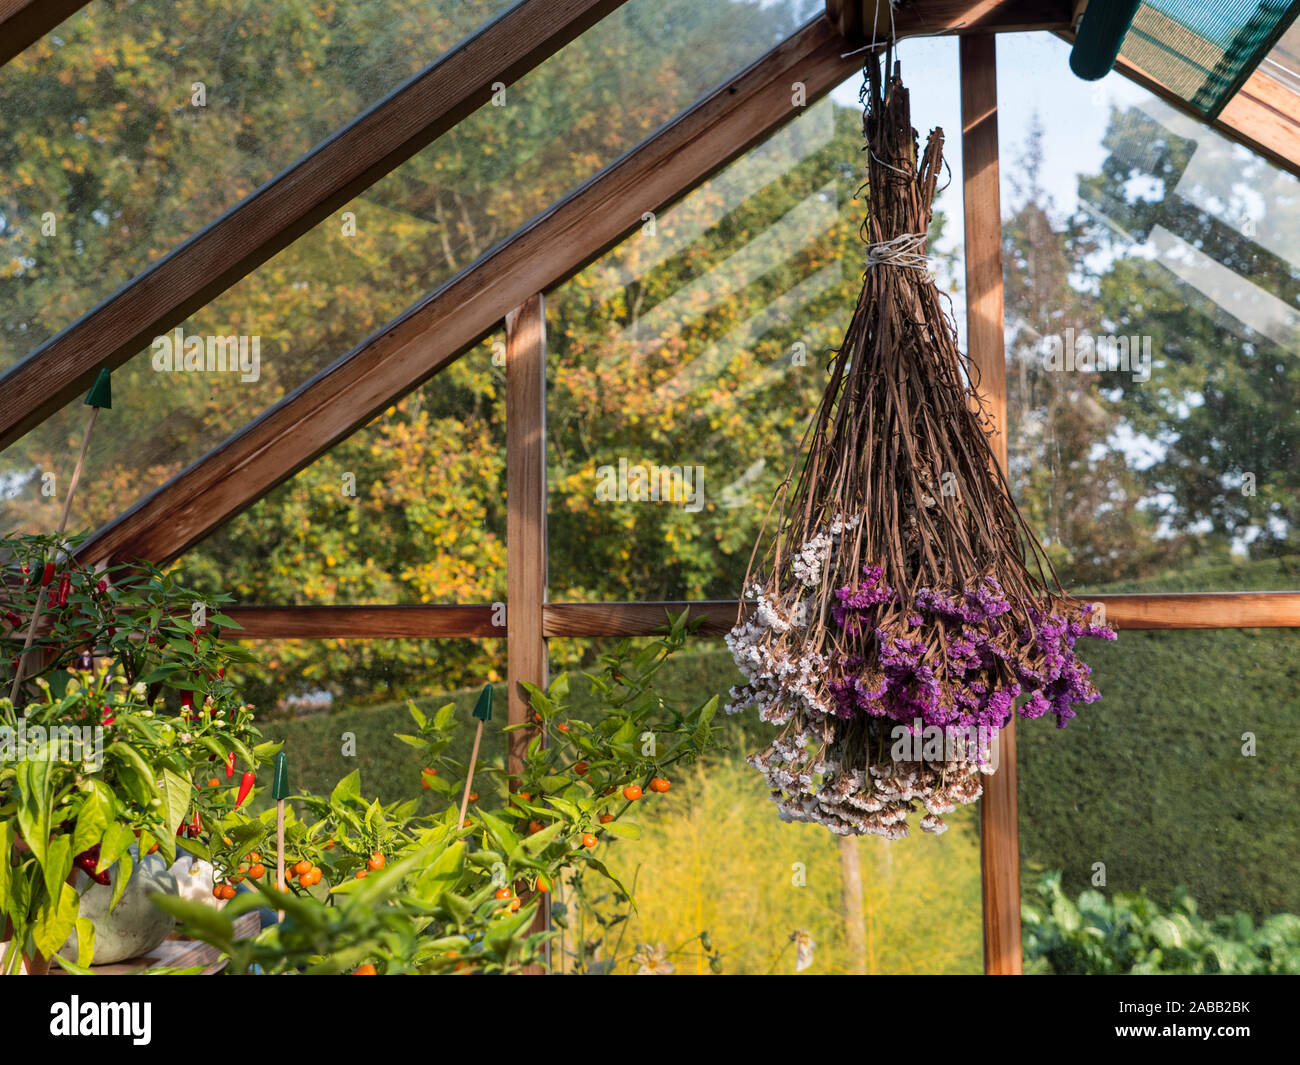 GREENHOUSE AUTUMN Dried flower arrangement 'limonium sinuatum' everlasting flower hanging as a focal point in traditional wooden greenhouse, with chilli peppers potted alongside in autumn sunshine Stock Photo